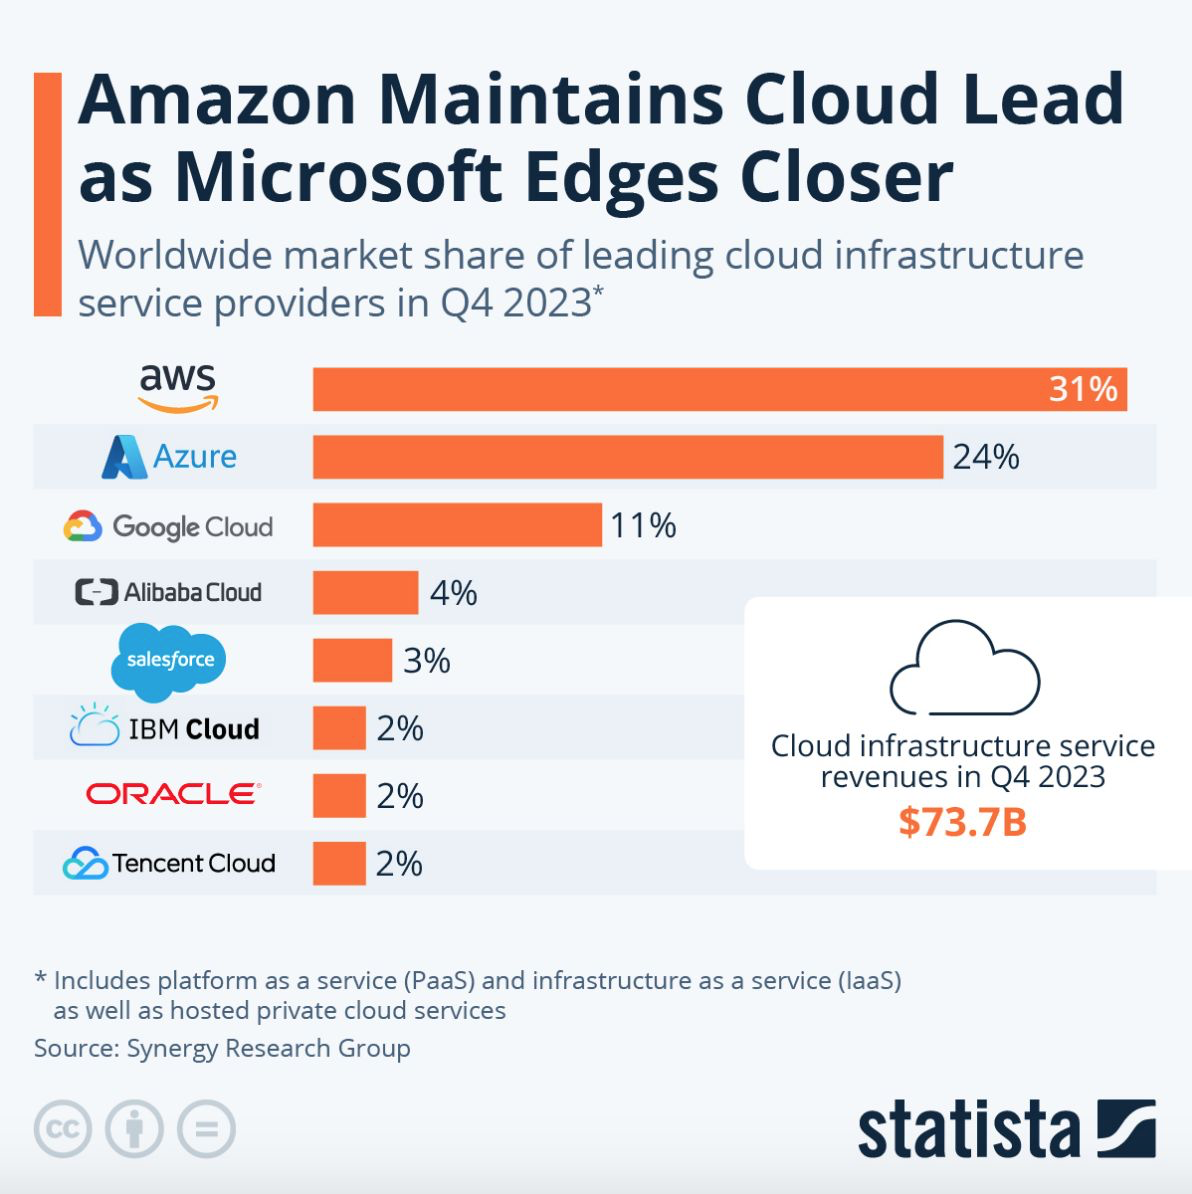 Statista's data showing Amazon maintaining the lead in cloud services market (31%), while Microsoft approaches closed, at 24%